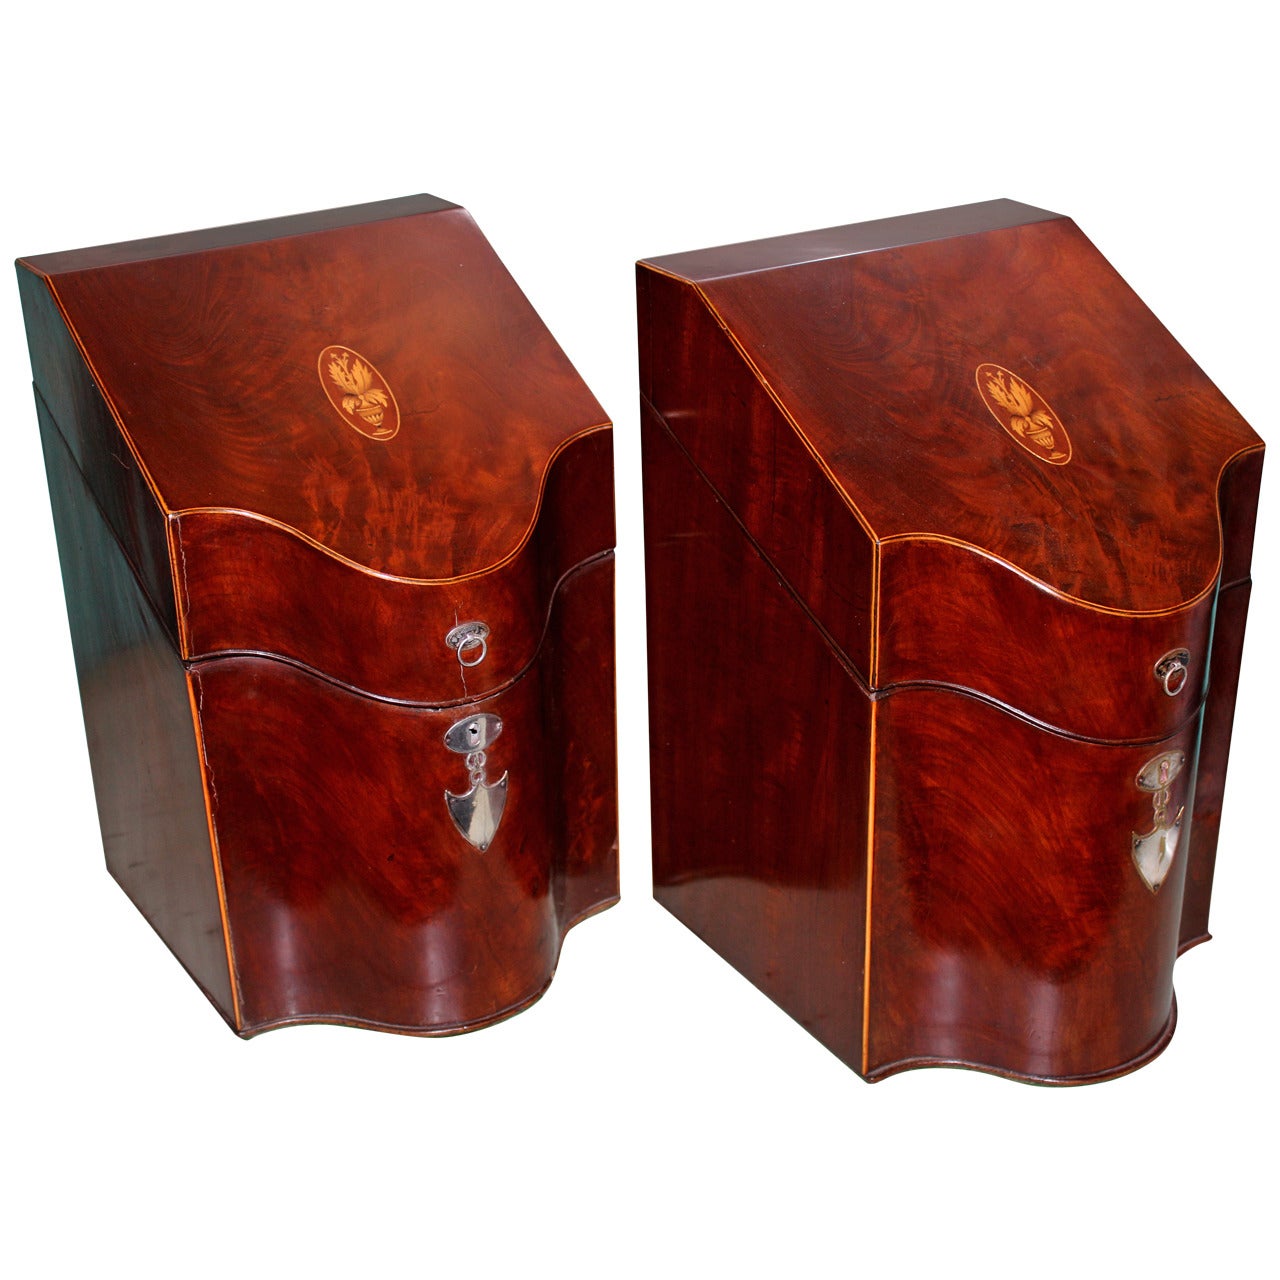 American Hepplewhite Knife Boxes in Mahogany with Silver Mounts